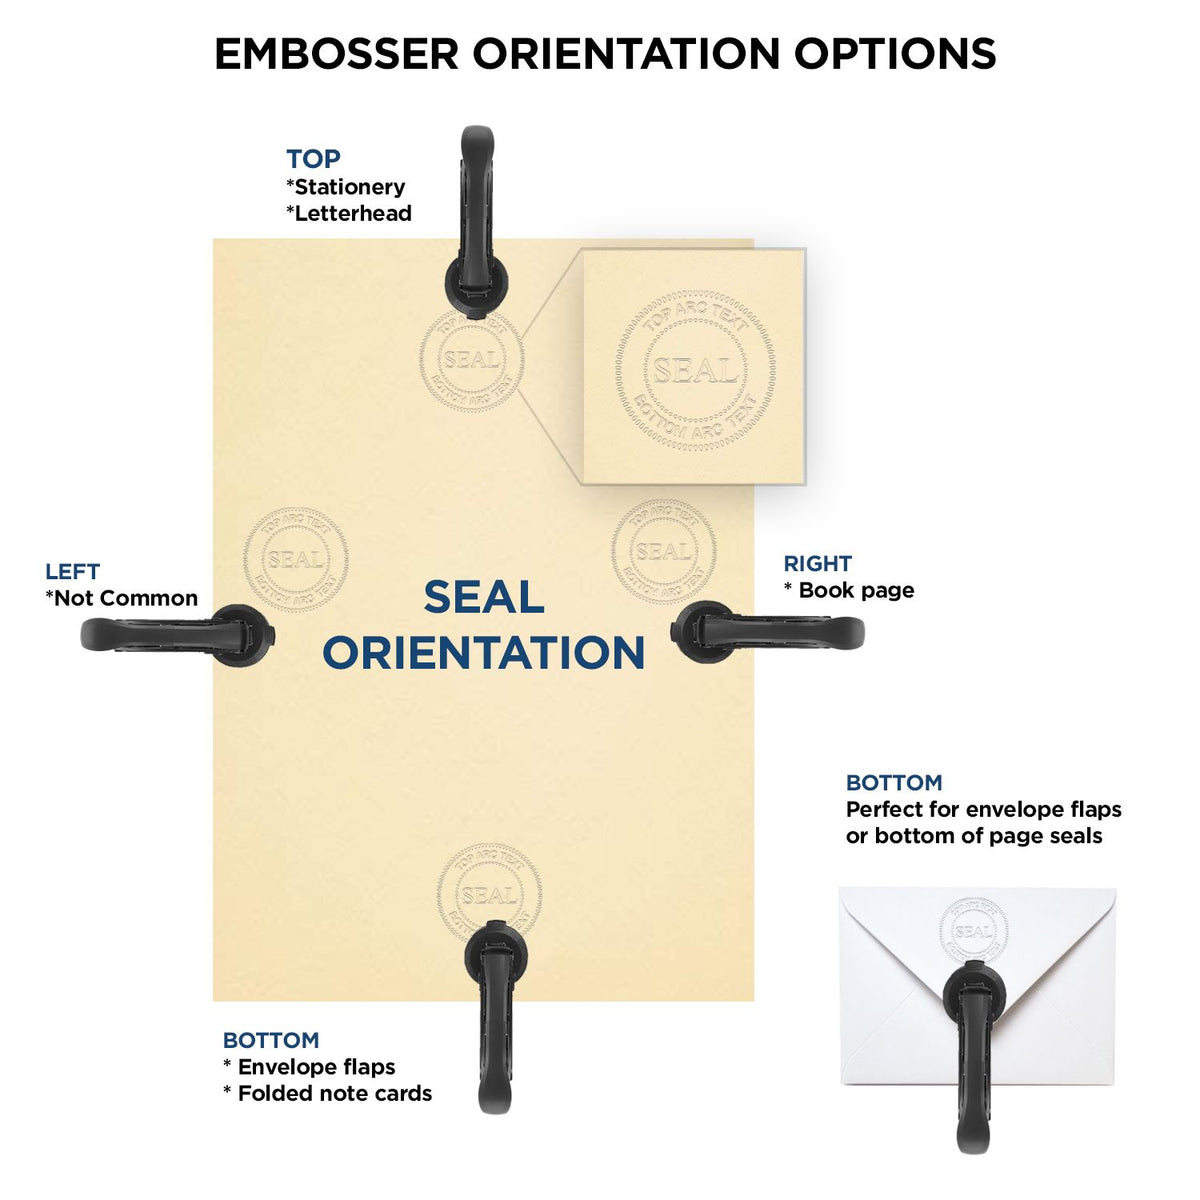 An infographic for the State of Louisiana Extended Long Reach Engineer Seal showing embosser orientation, this is showing examples of a top, bottom, right and left insert.